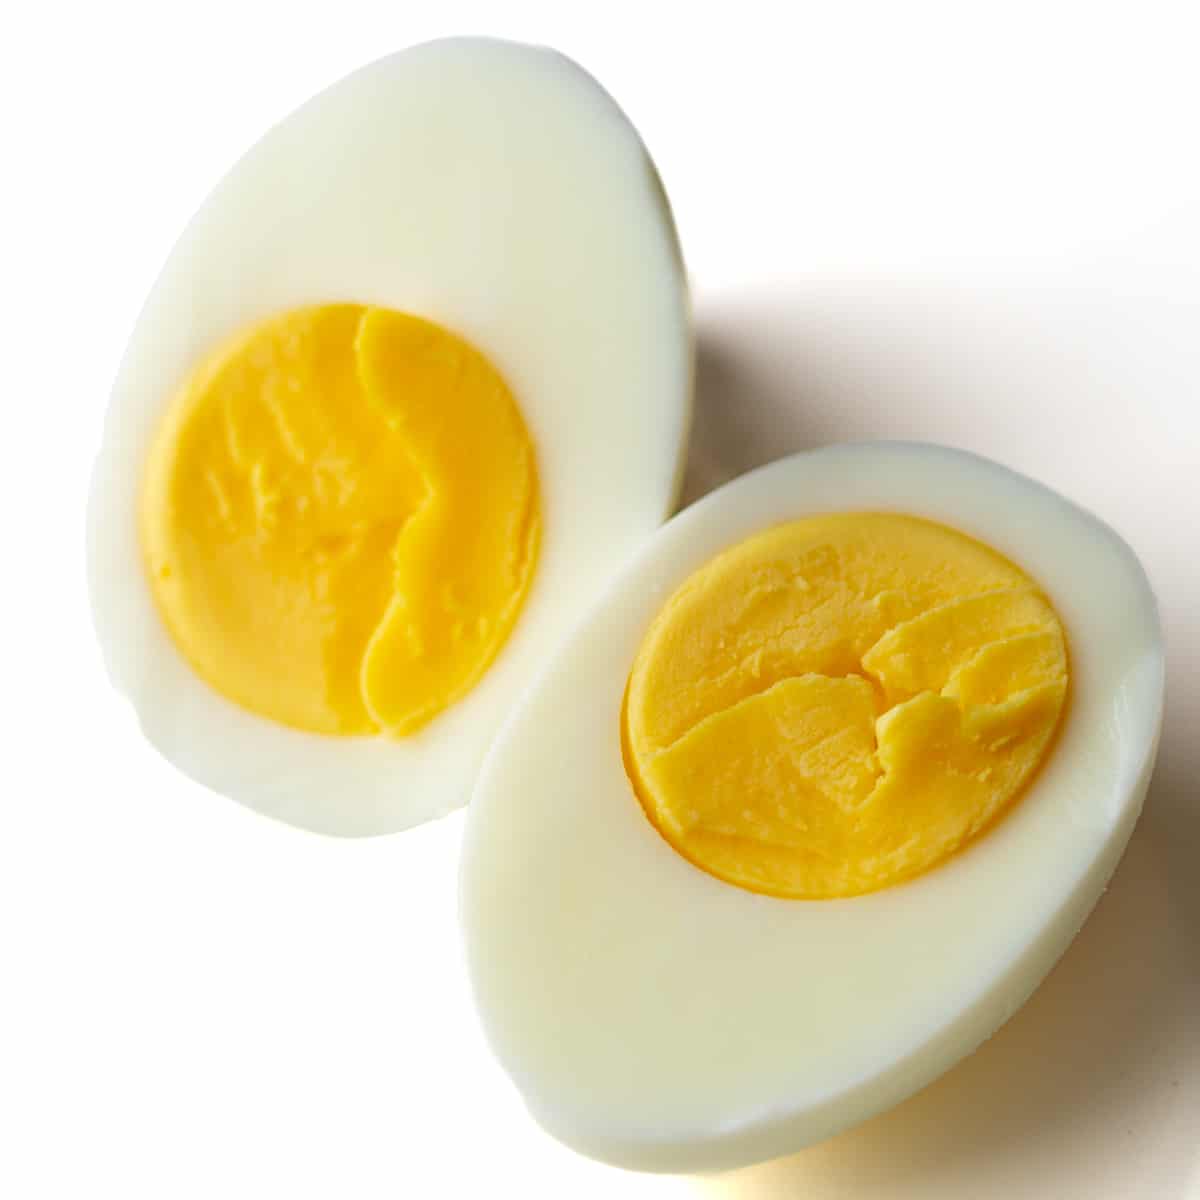 two halves of a hard boiled egg showing yolks